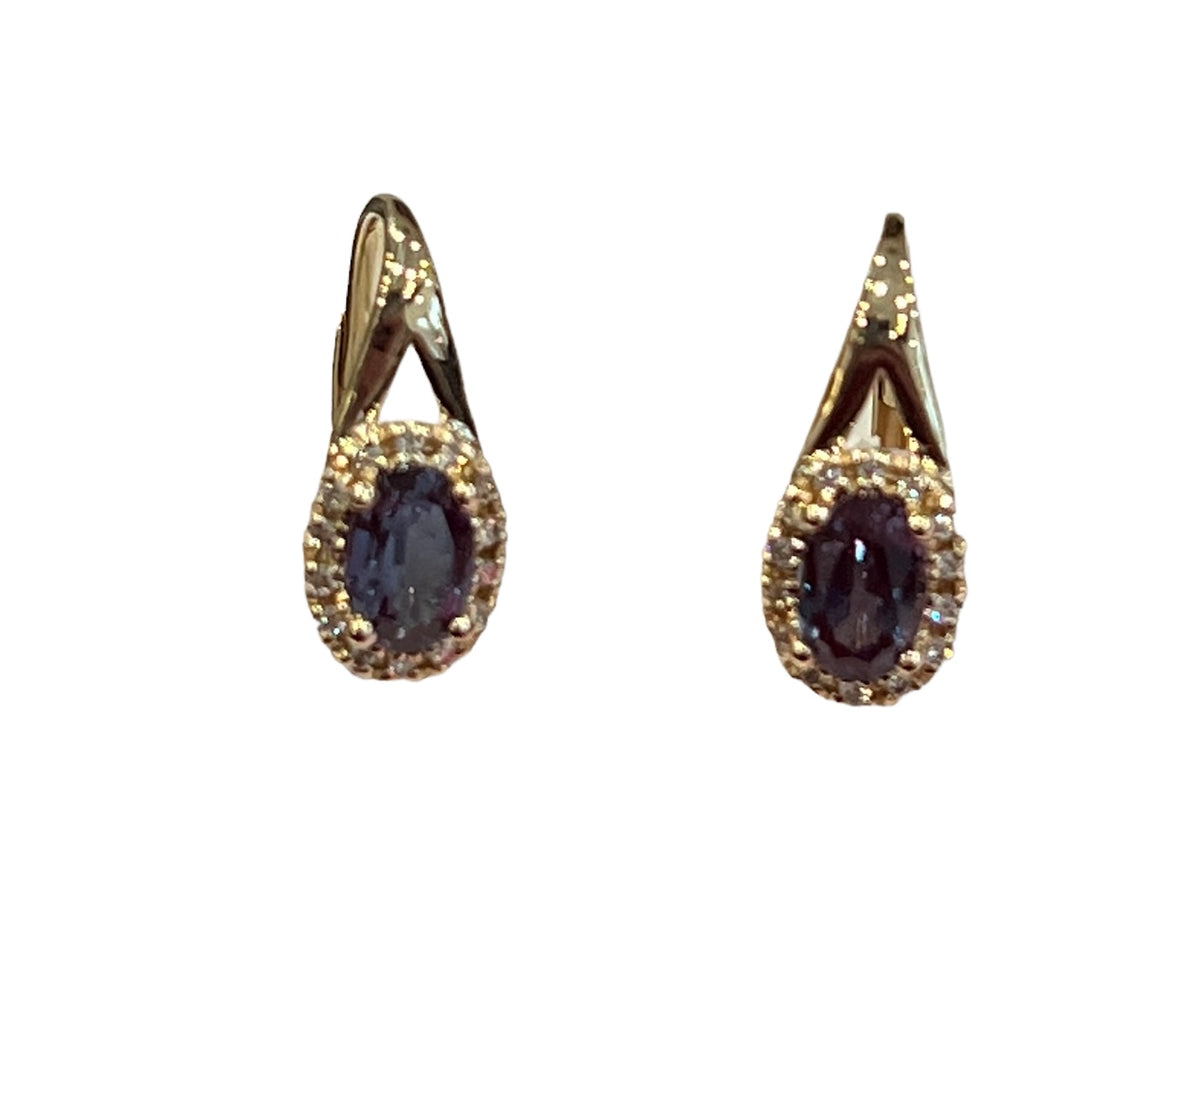 10K Yellow Gold 6x4mm Oval Cut Created Alexandrite and 0.11cttw Diamond Halo Earrings with Leverbacks